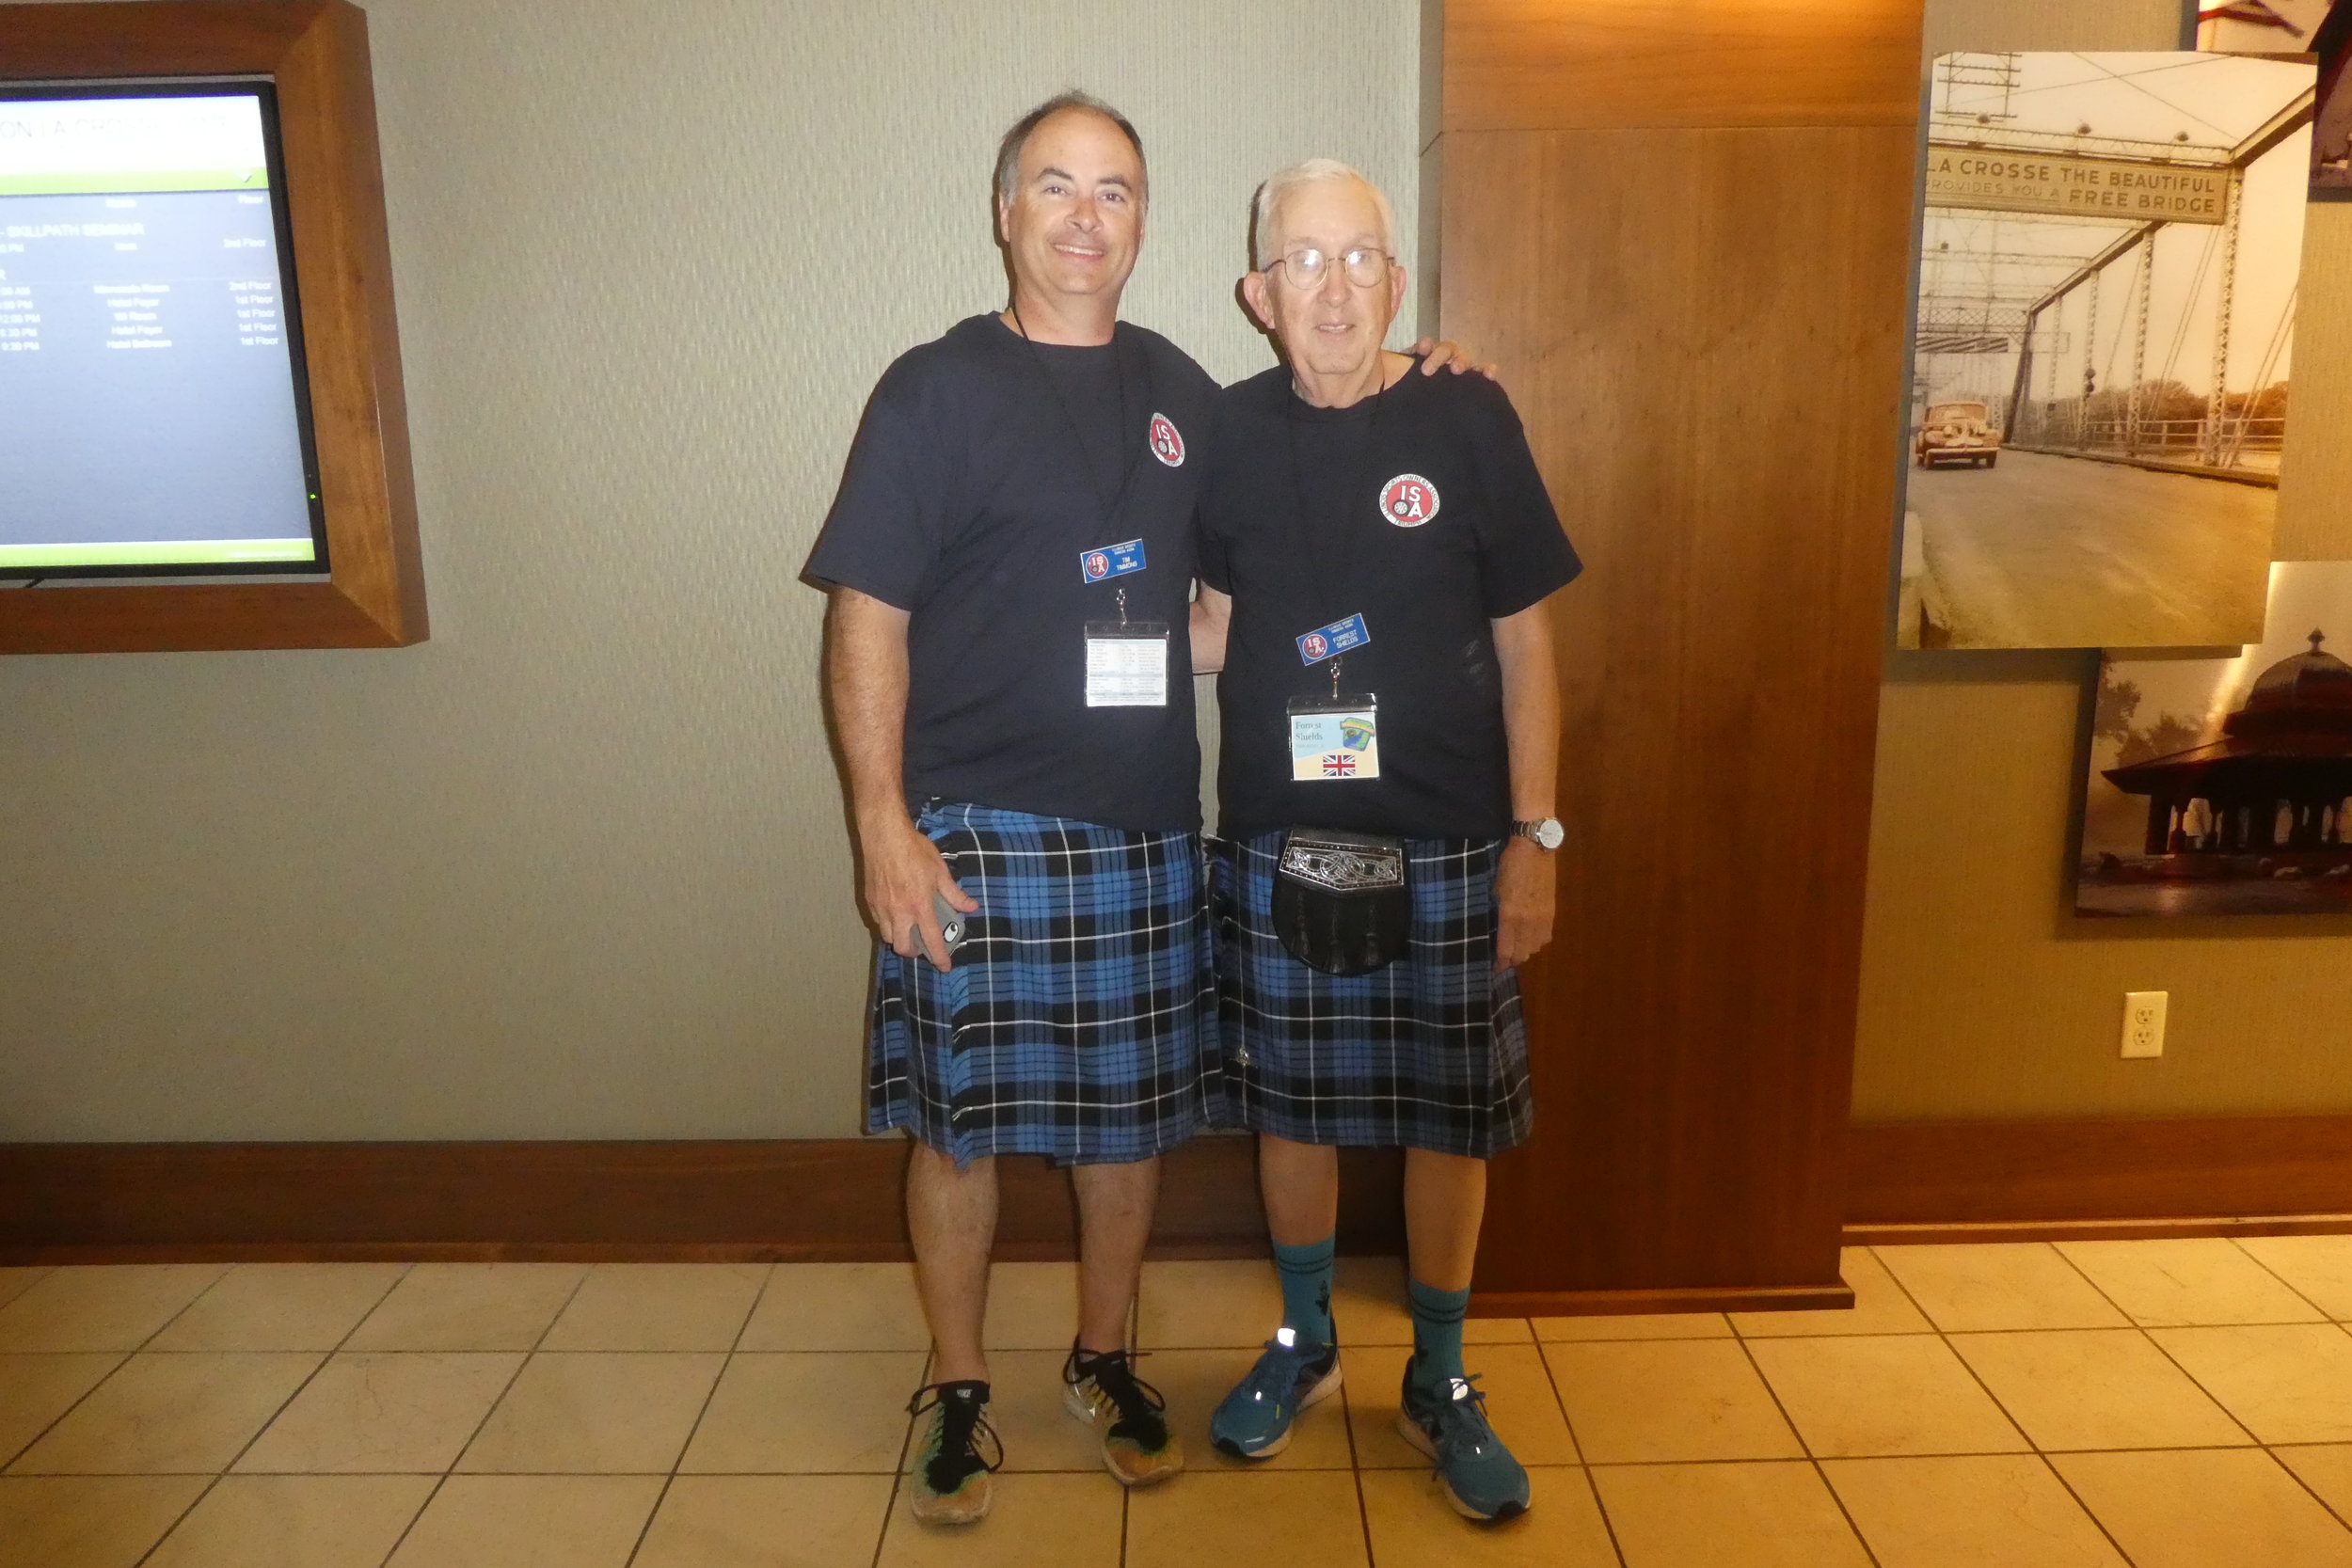  Father and son that had a TR3. They ran all the events, including the Autocross. Wore the kilts with their clan colors everyday.     